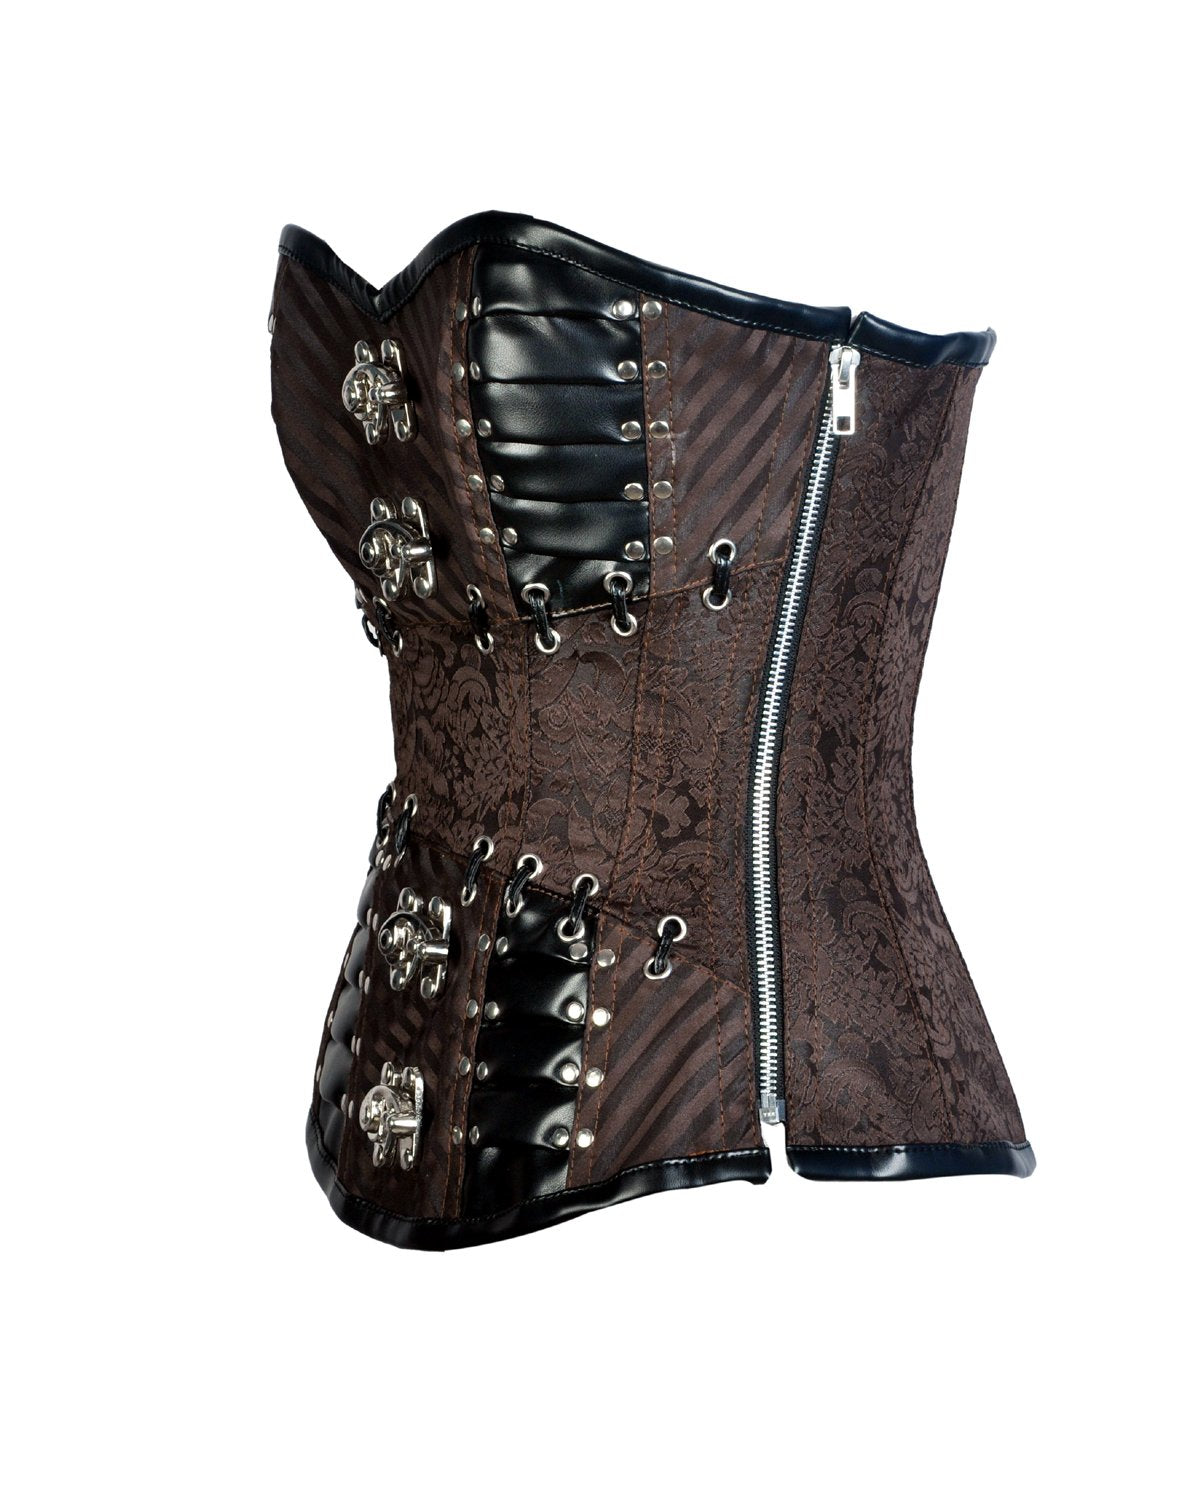 Lampard Coffee Brown Brocade & Faux Leather Steampunk Corset